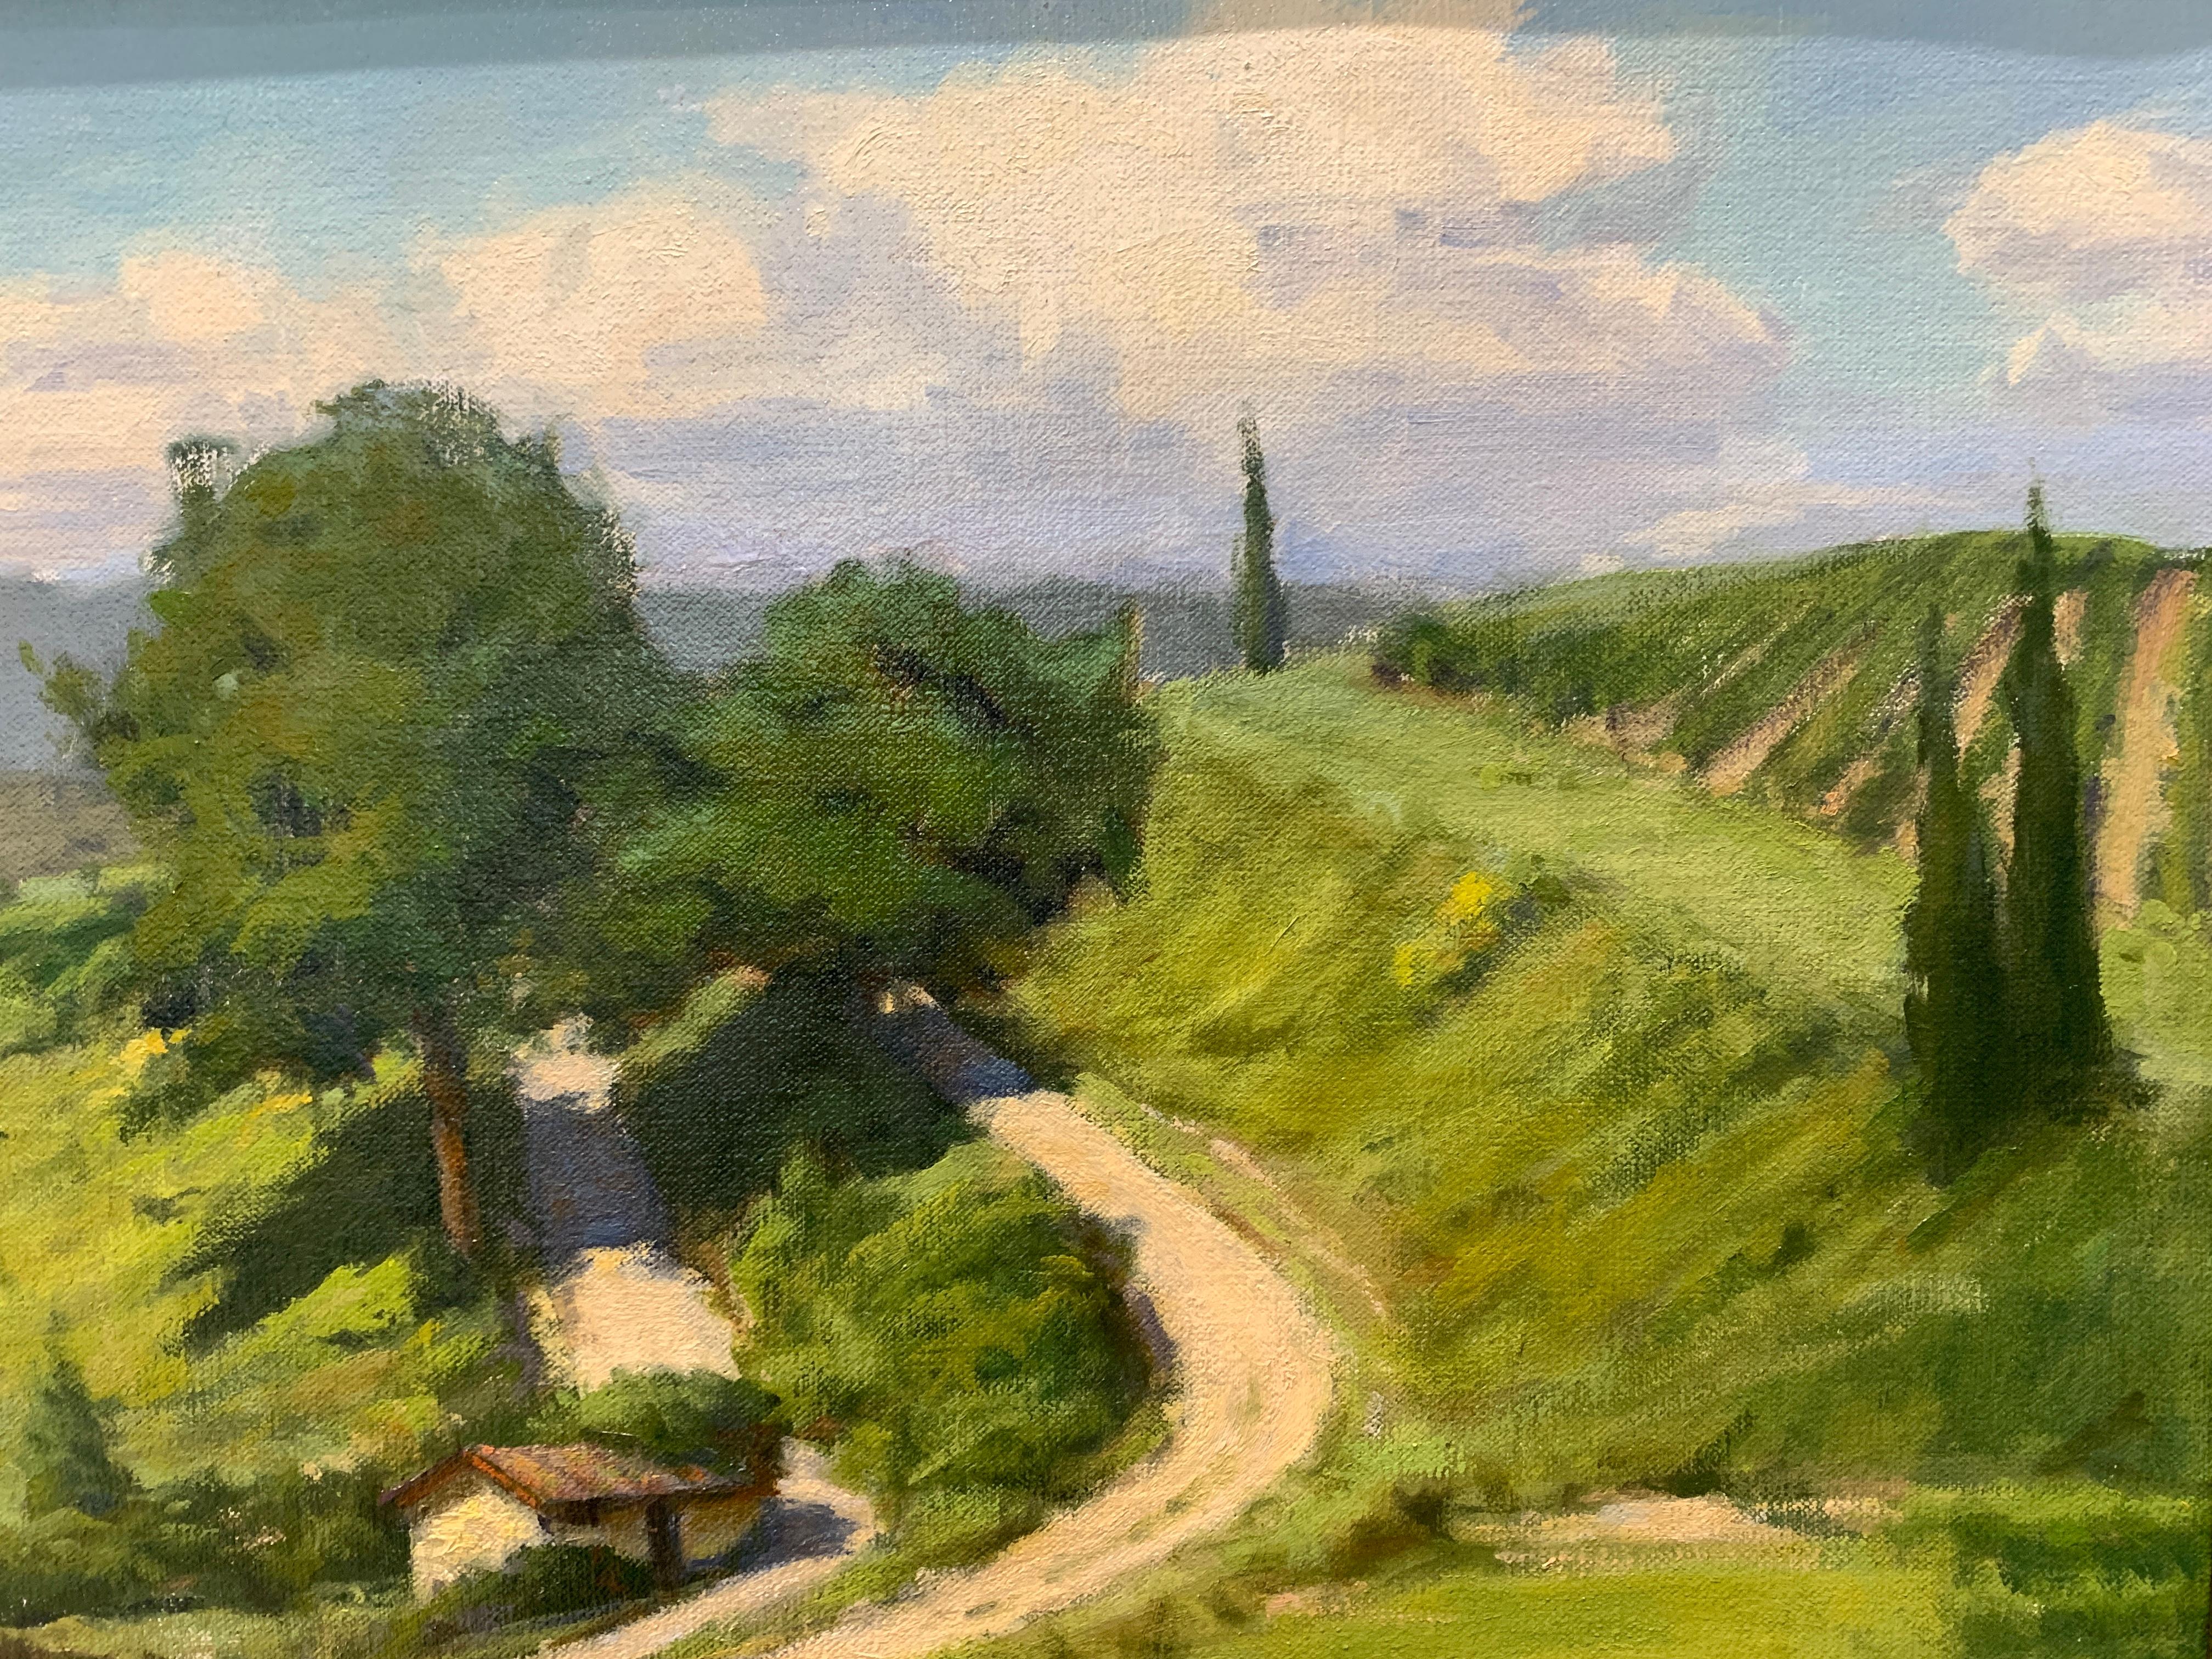 An oil painting of a landscape in Tuscany. Rolling hills, a winding dirt-road, Cyprus trees, and a small farm-house cottage, underneath a pale blue sky. 

Carl Bretzke is a representational painter who specializes in urban scenes and plein-air